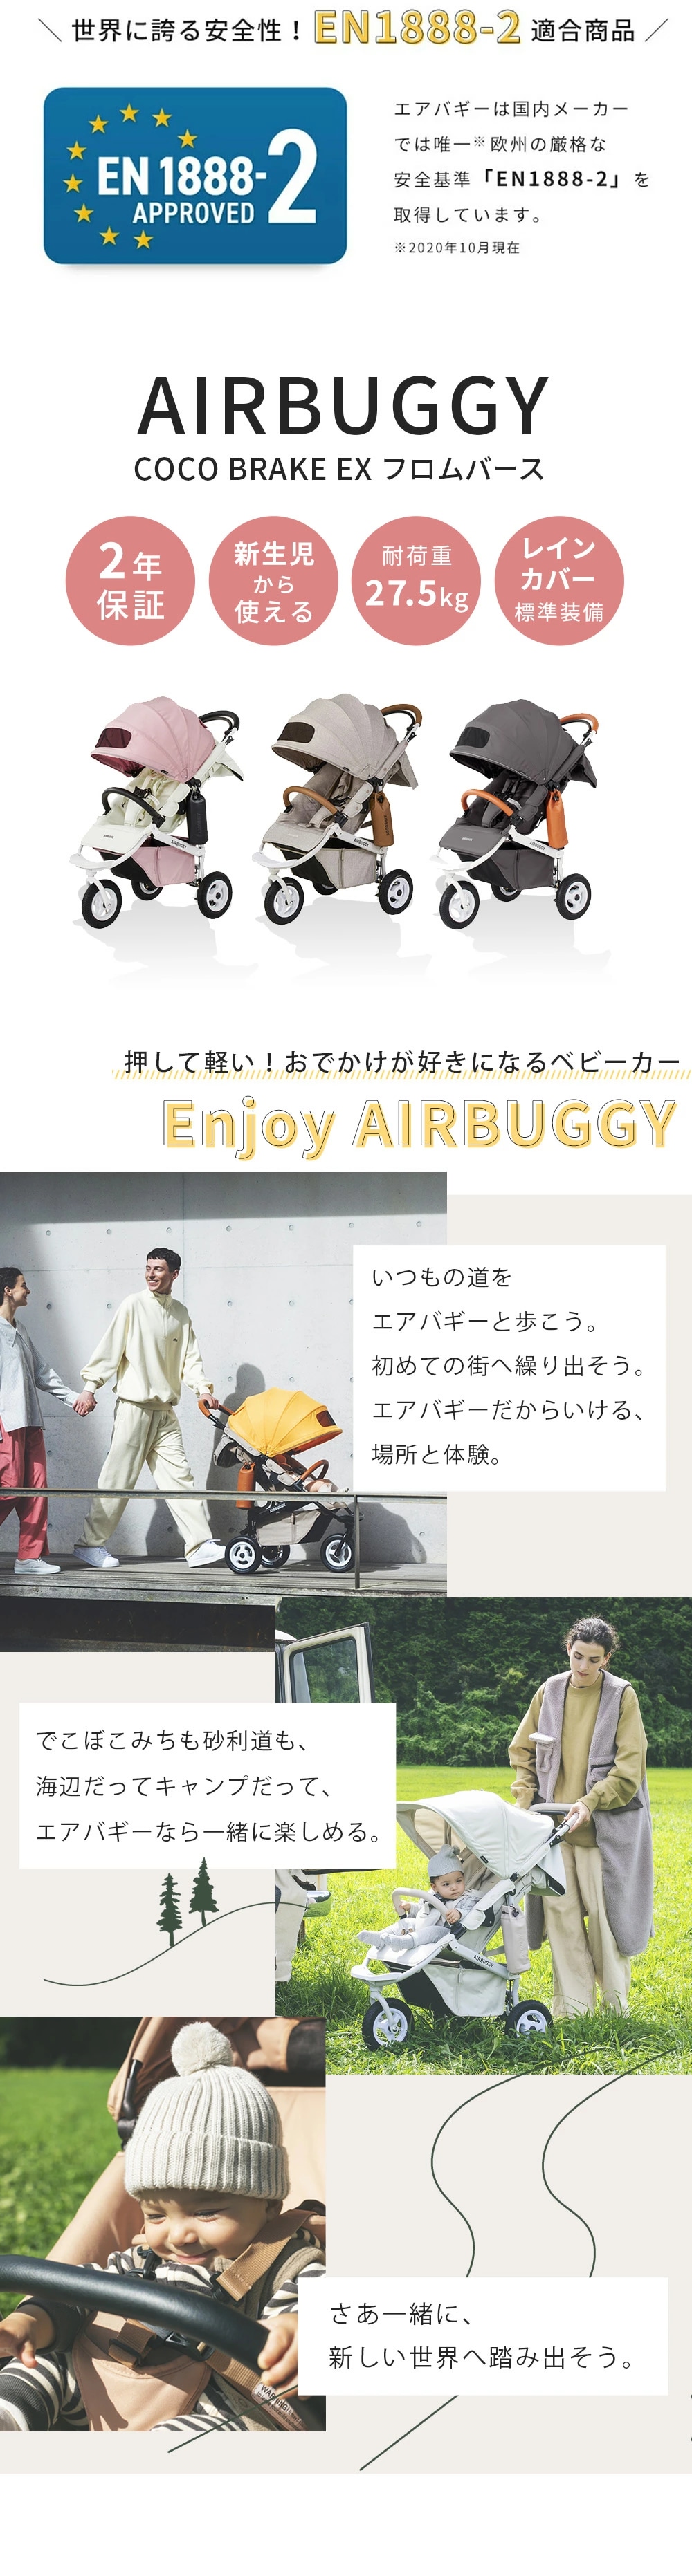 airbuggy